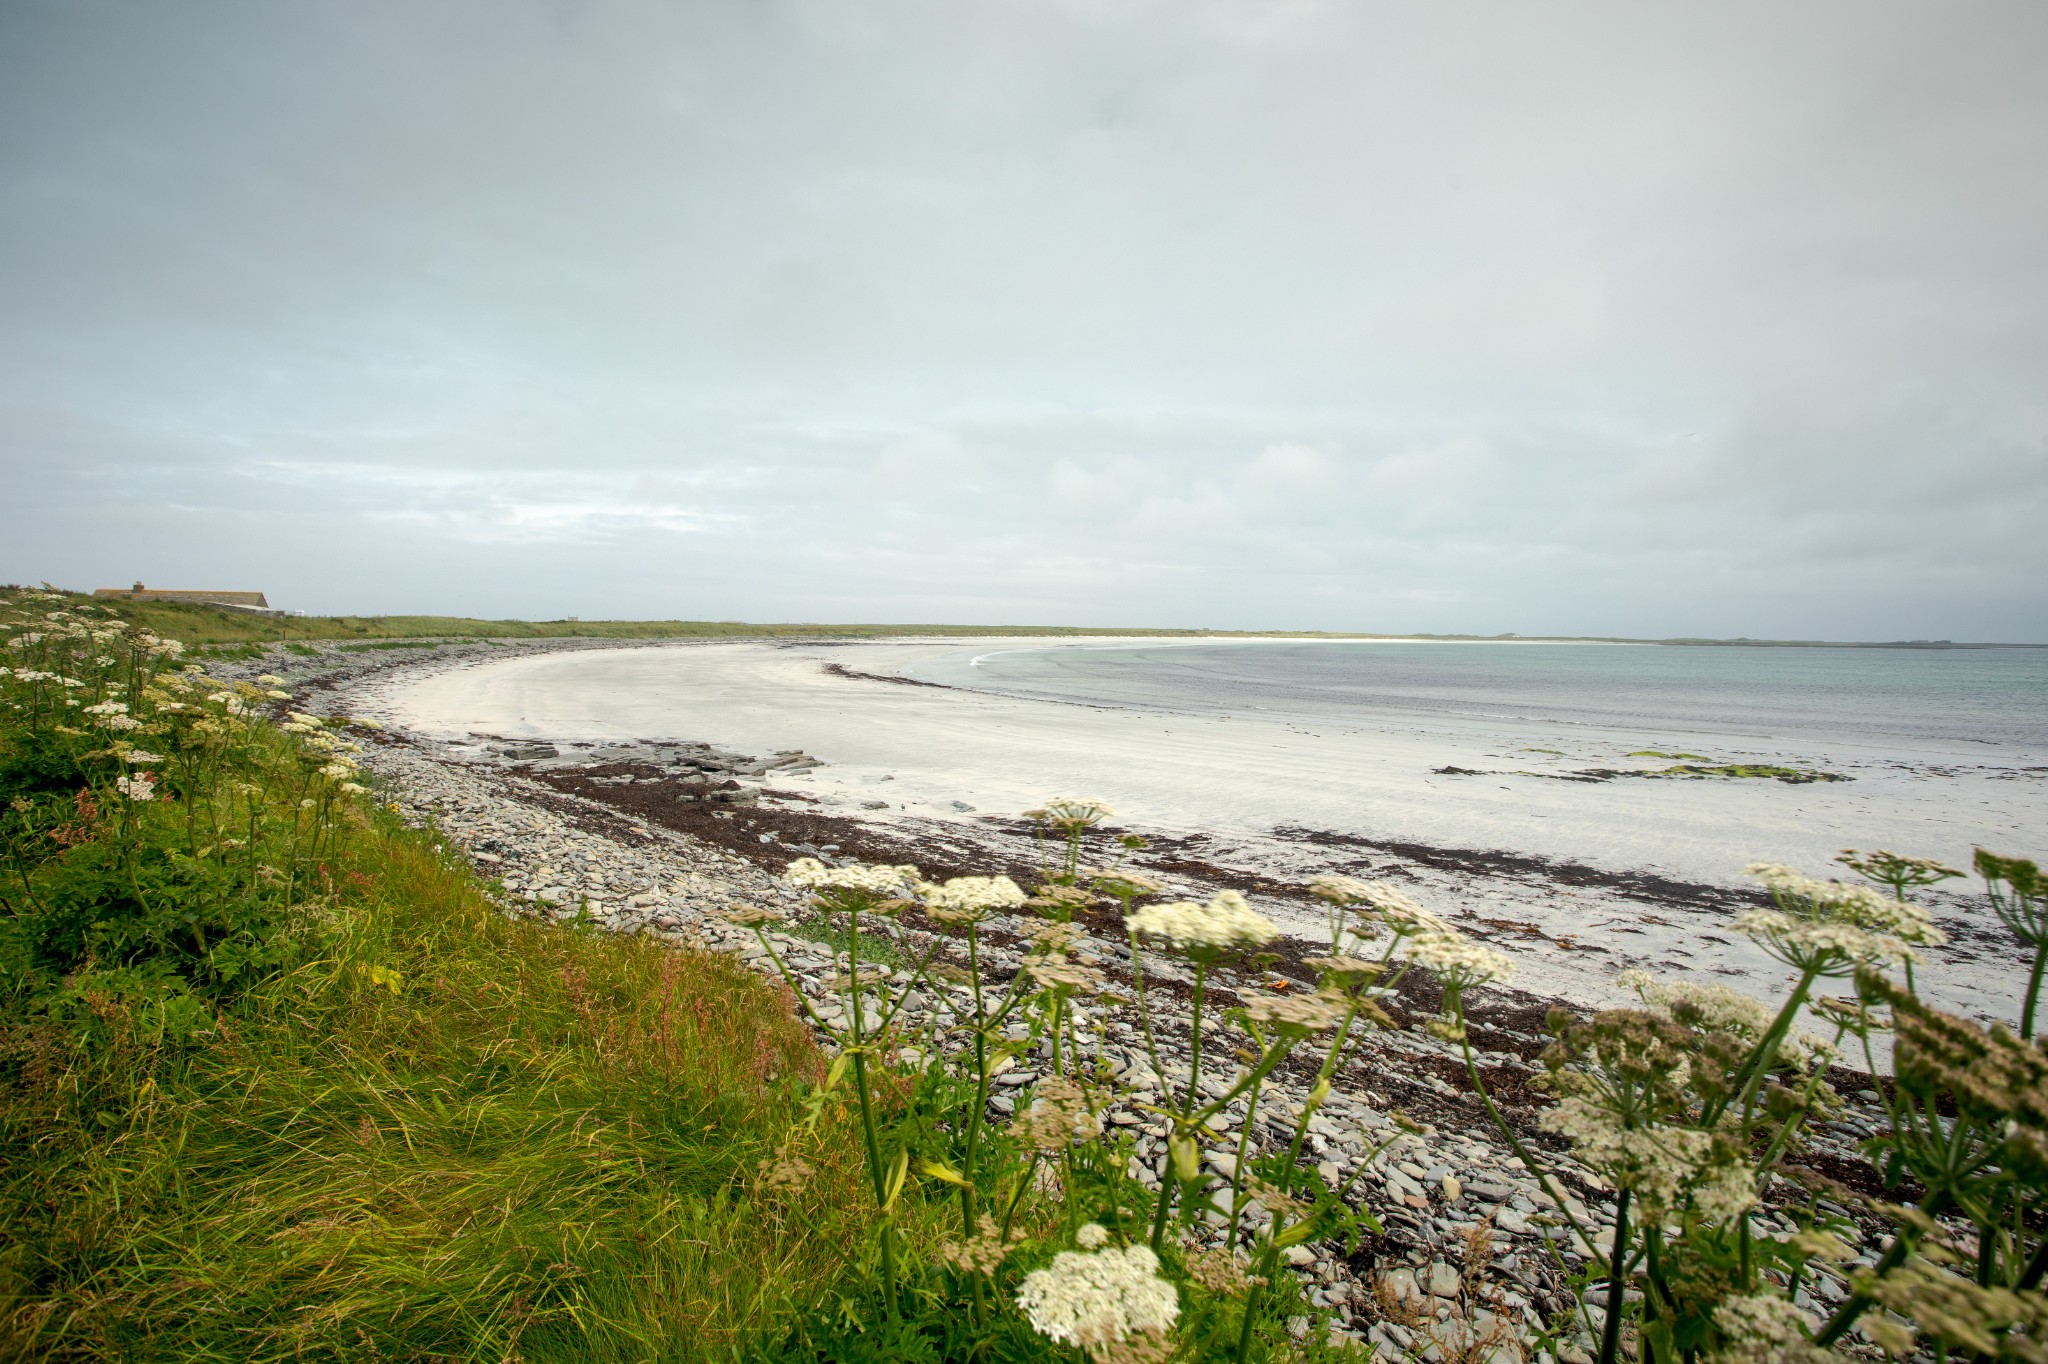 Beach at Stywick, Sanday, Orkney